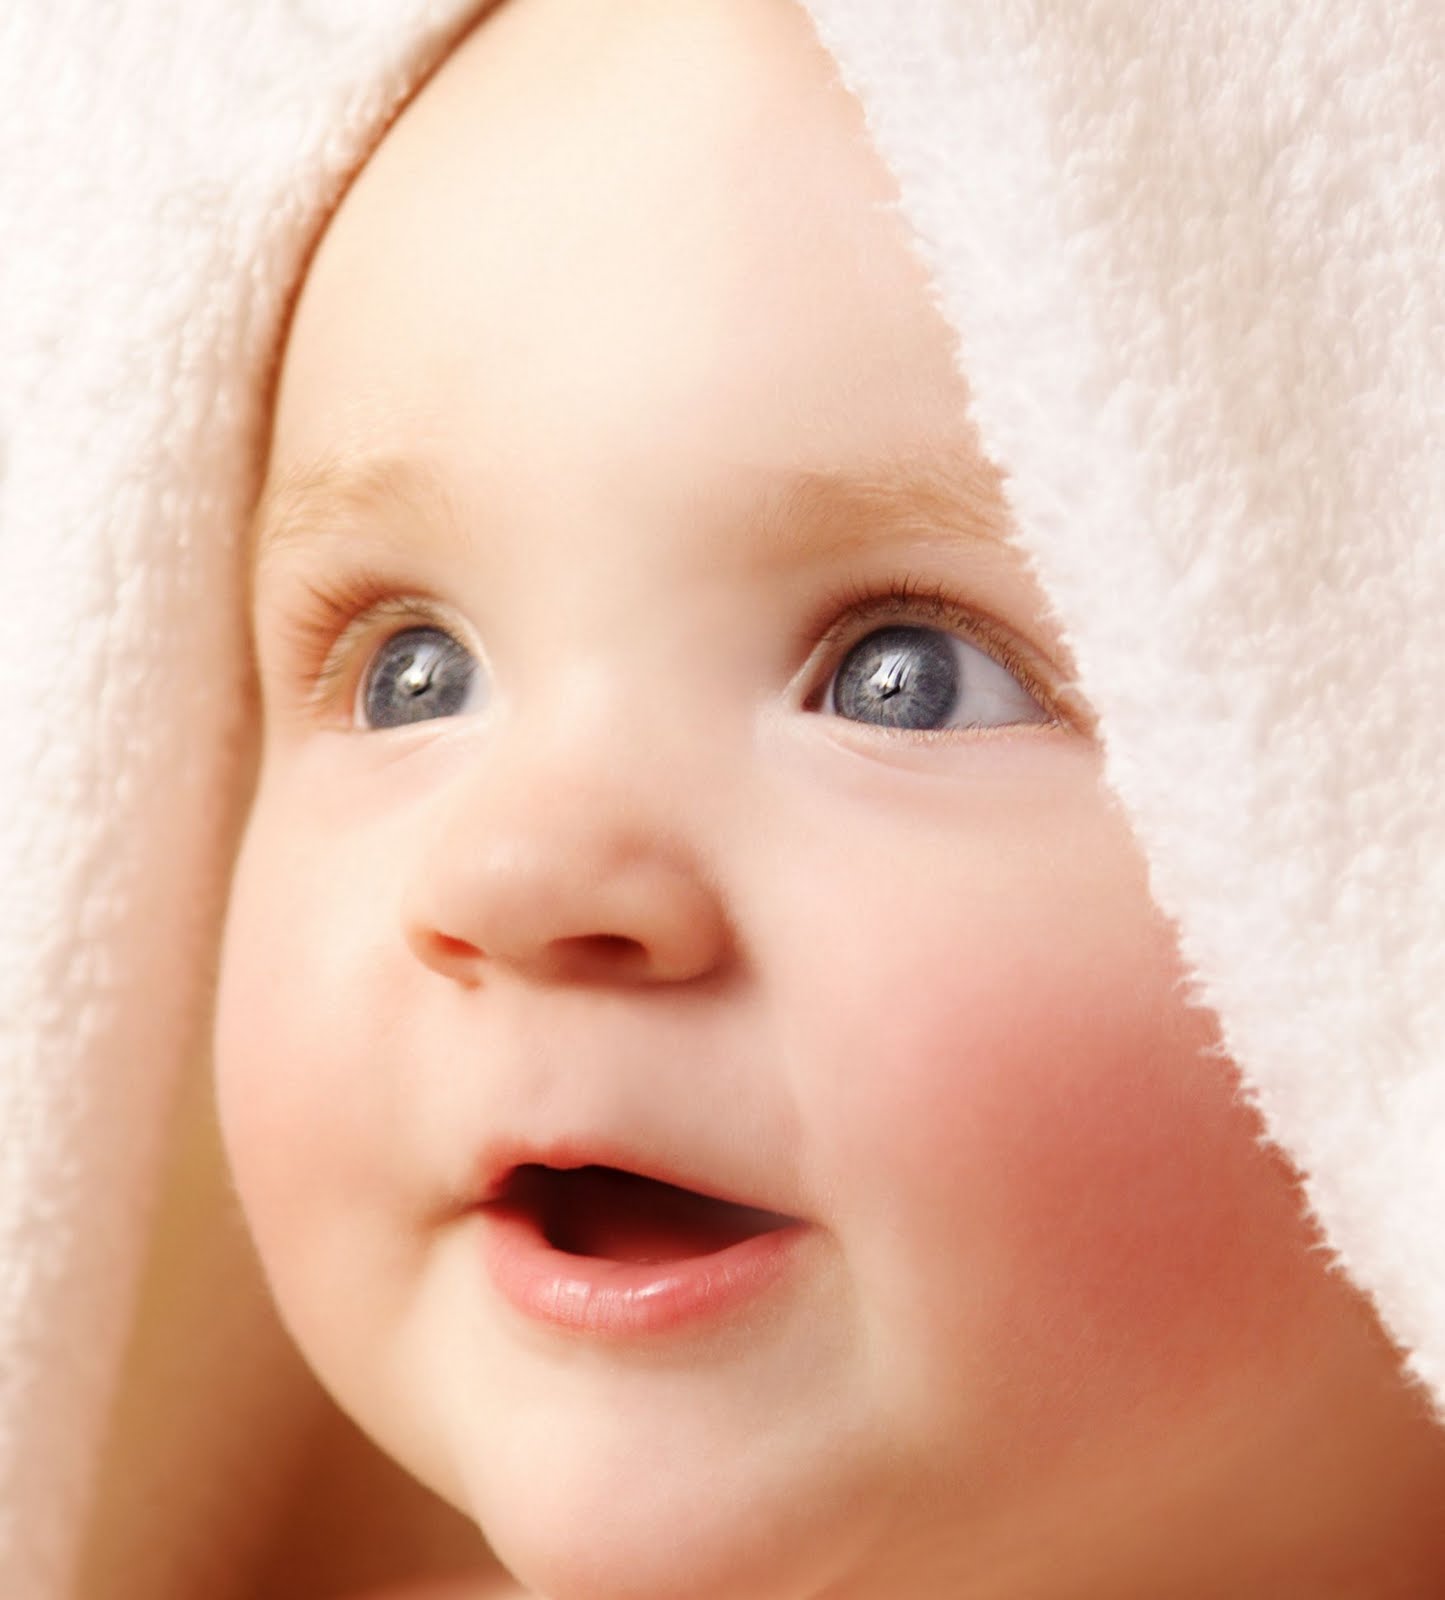 Happy Funny Babies 25269 Hd Wallpapers in Baby   Imagescicom 1445x1600